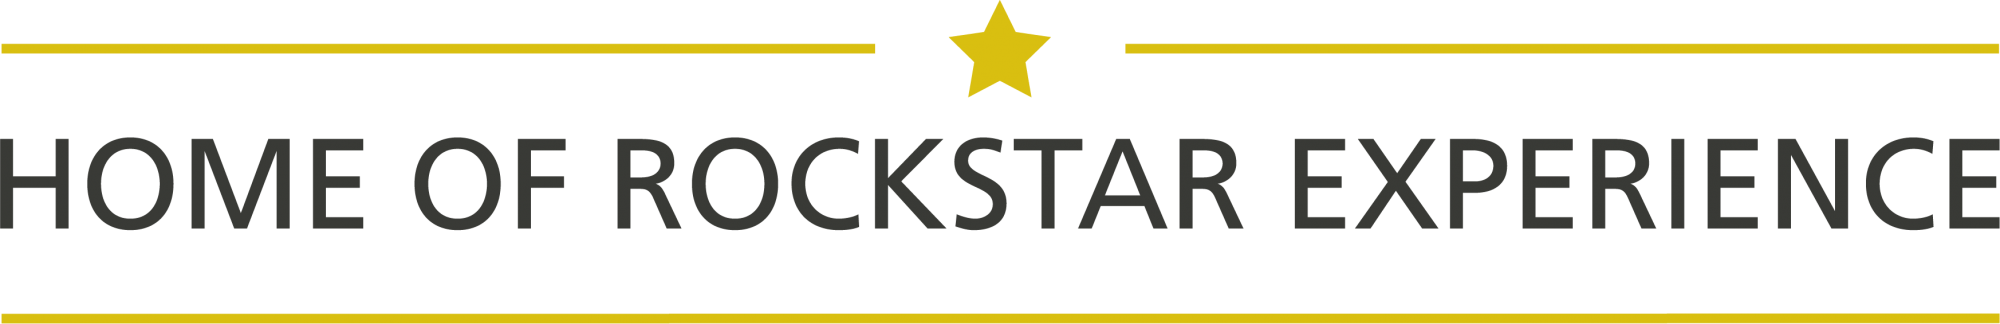 Home of Rockstar Experience